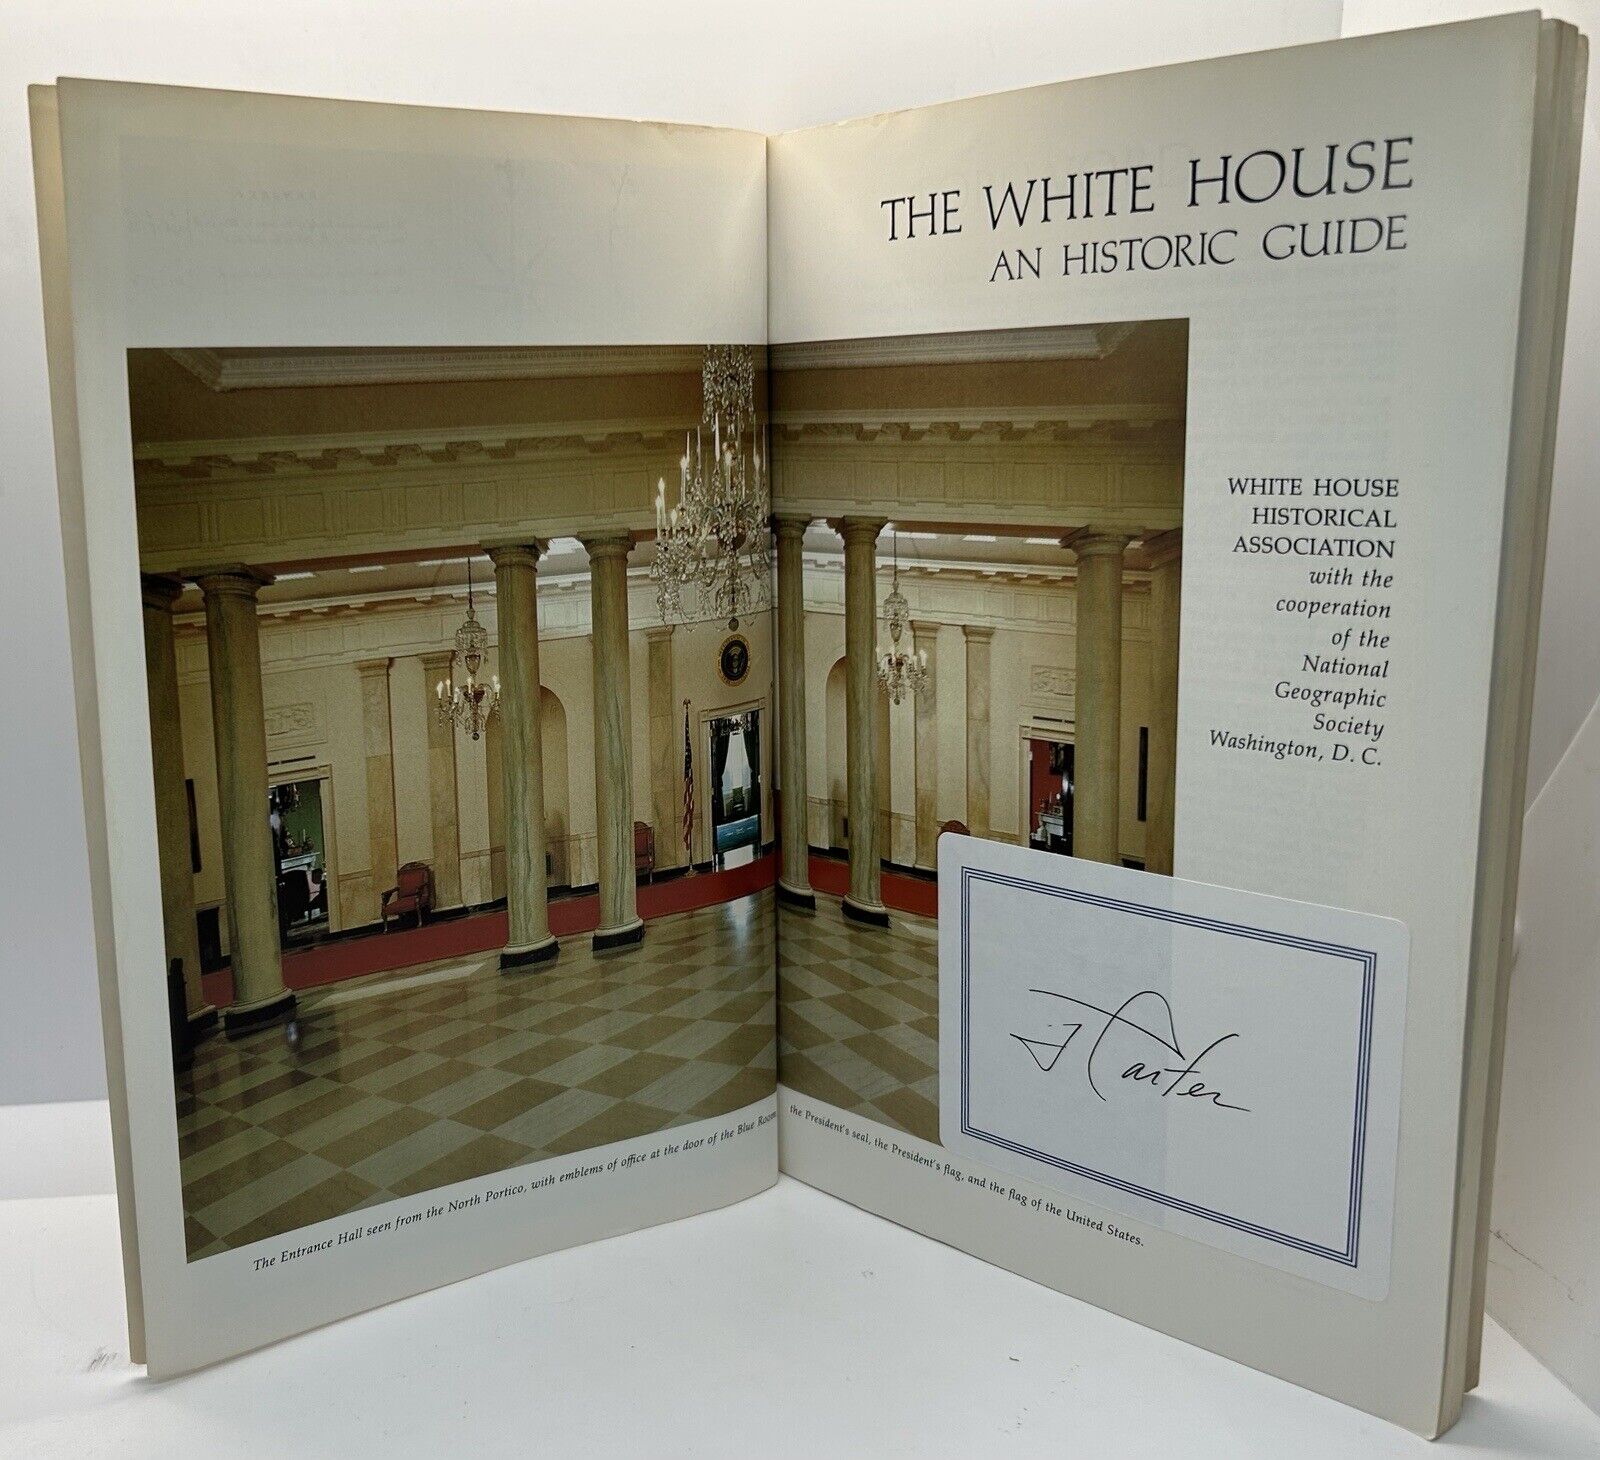 Jimmy Carter Signed The White House Historic Guide Book Autographed POTUS